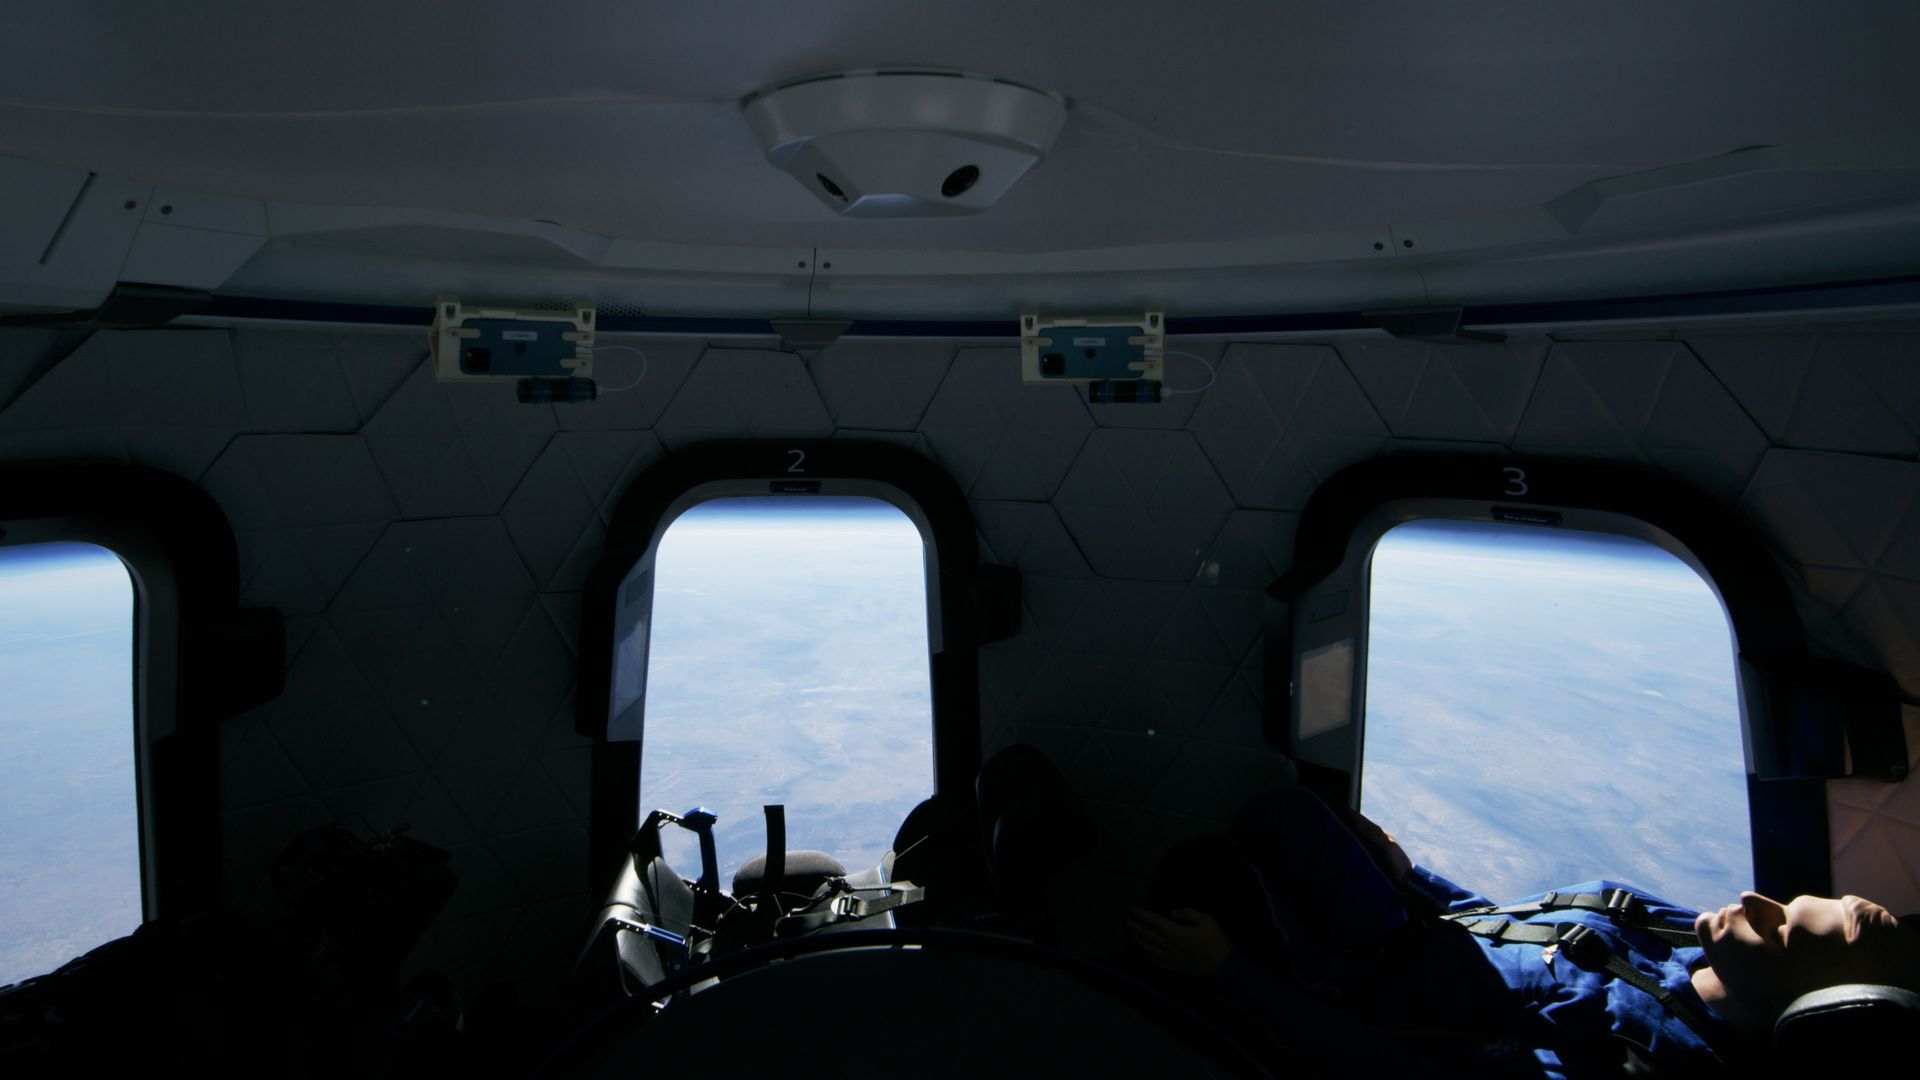 A test dummy flies to suborbital space with a view of Earth out the window